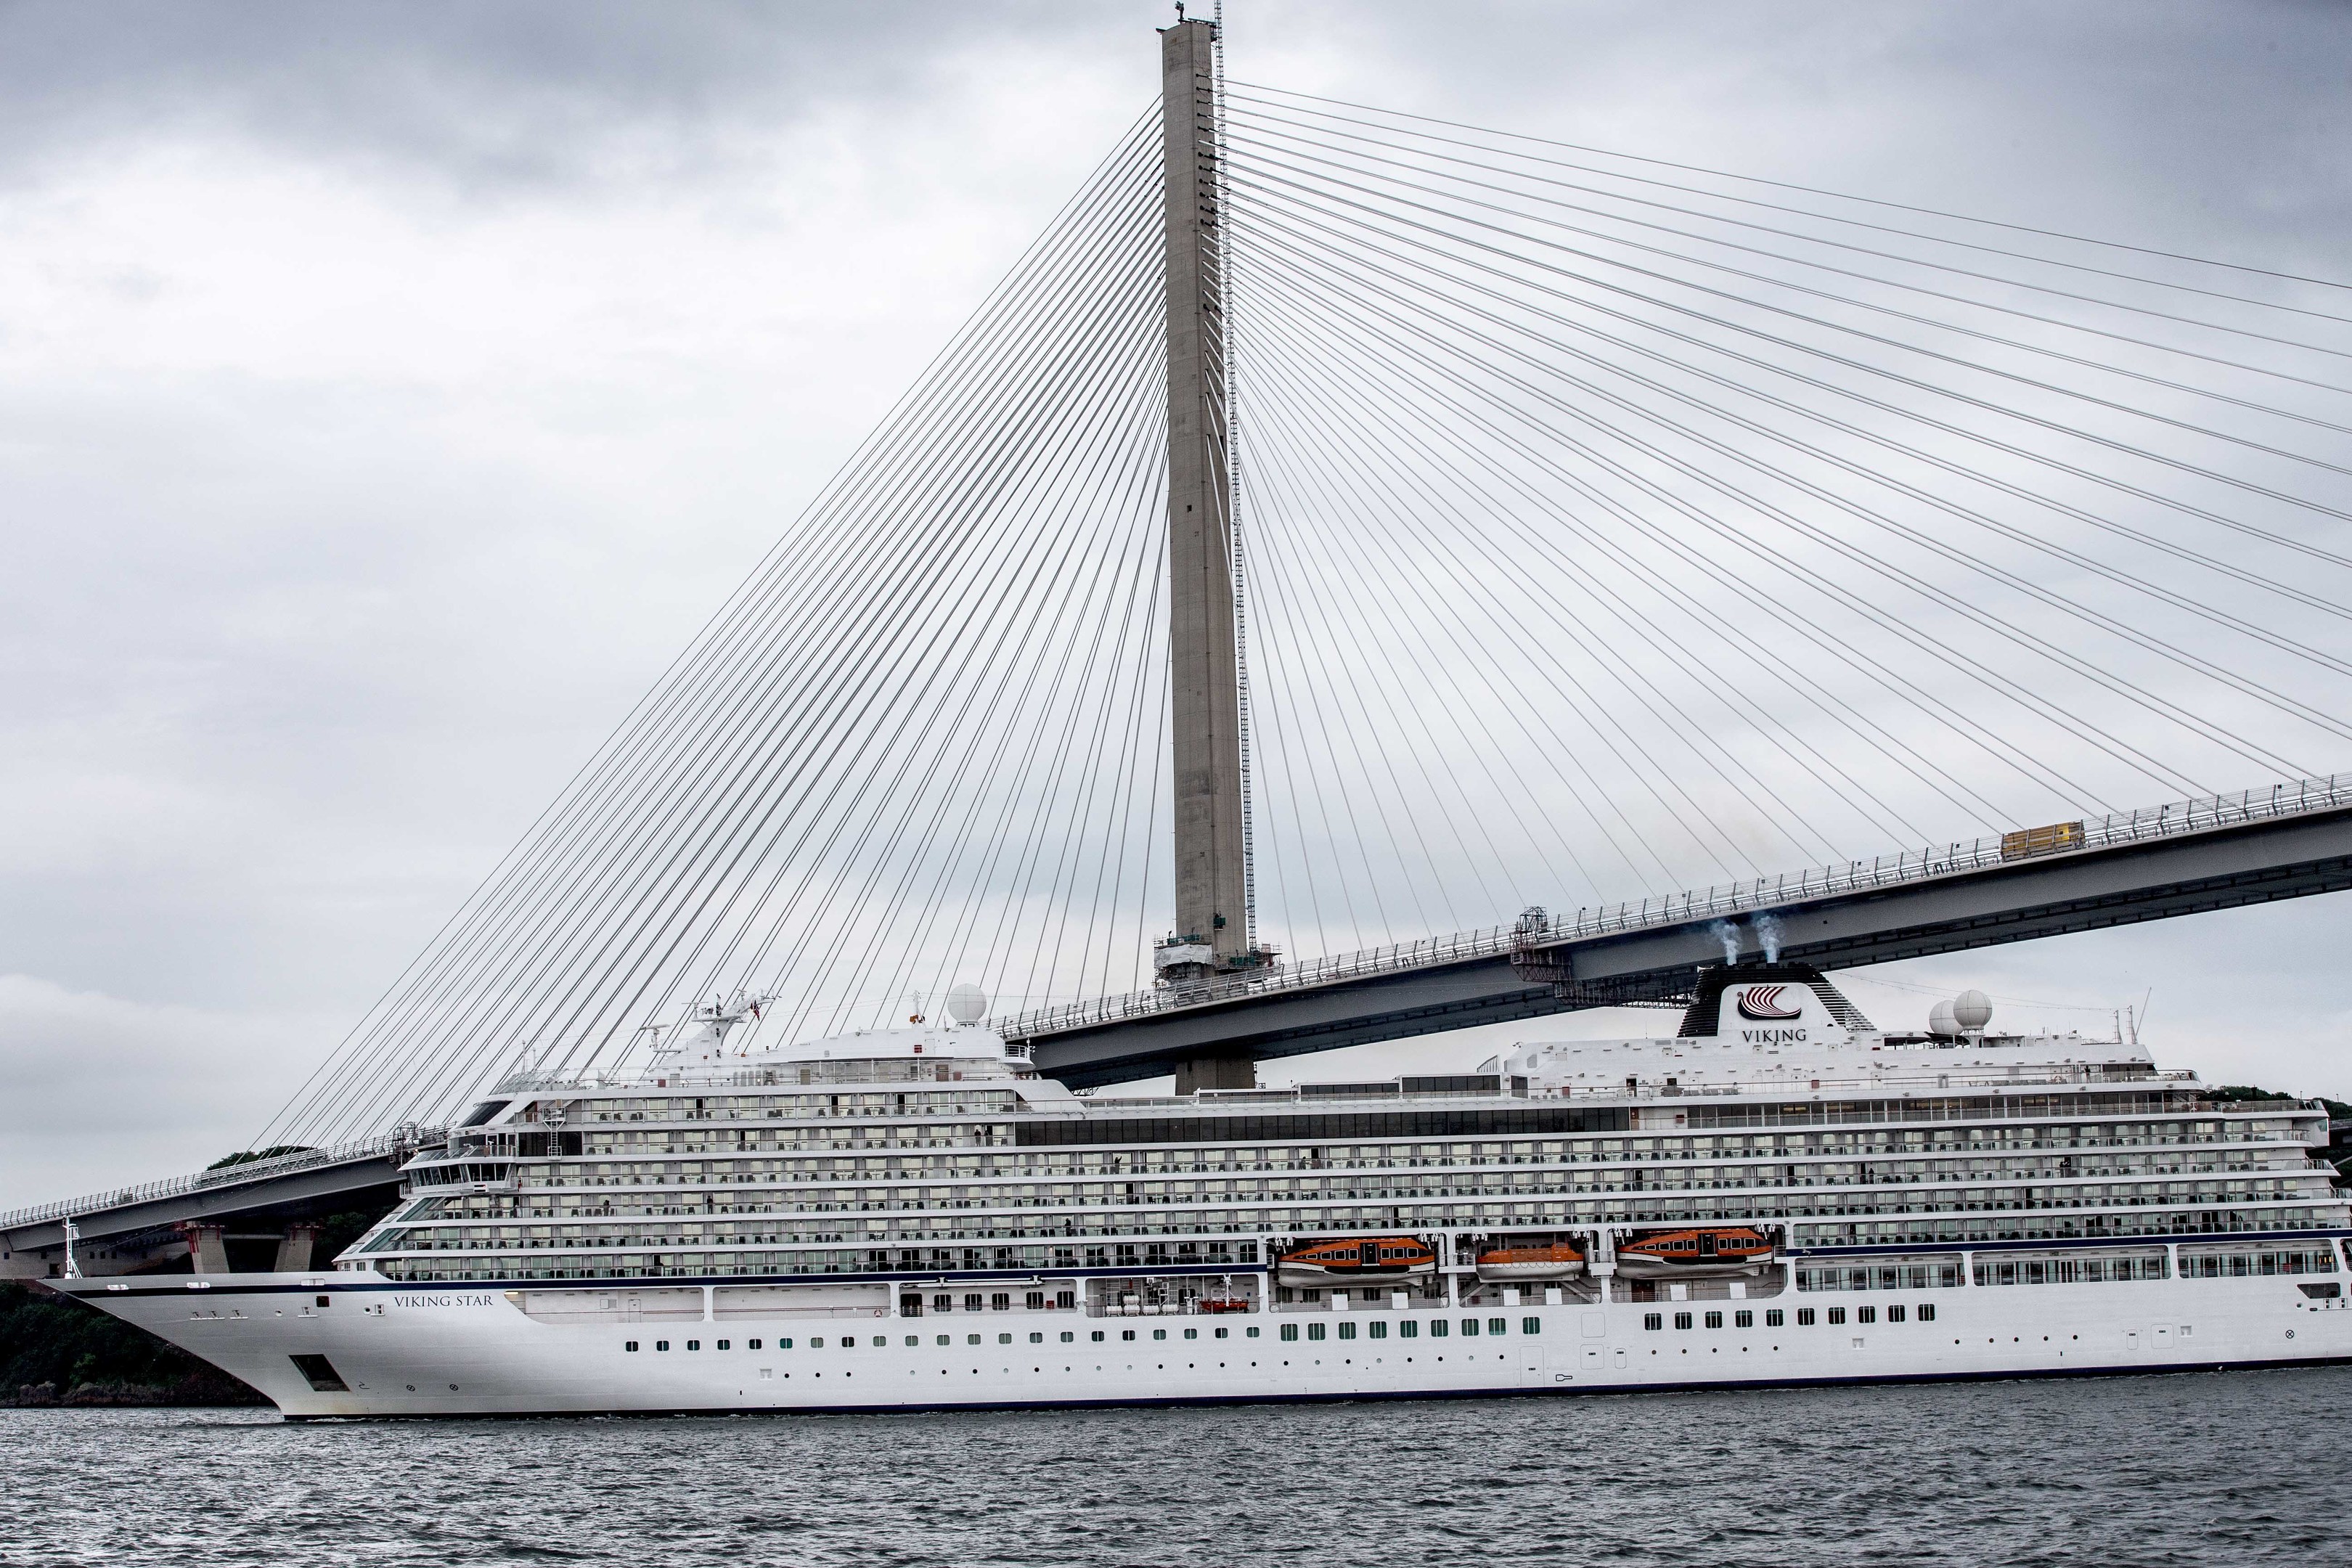 The Viking Star cruise ship navigates the Queensferry Crossing last week.